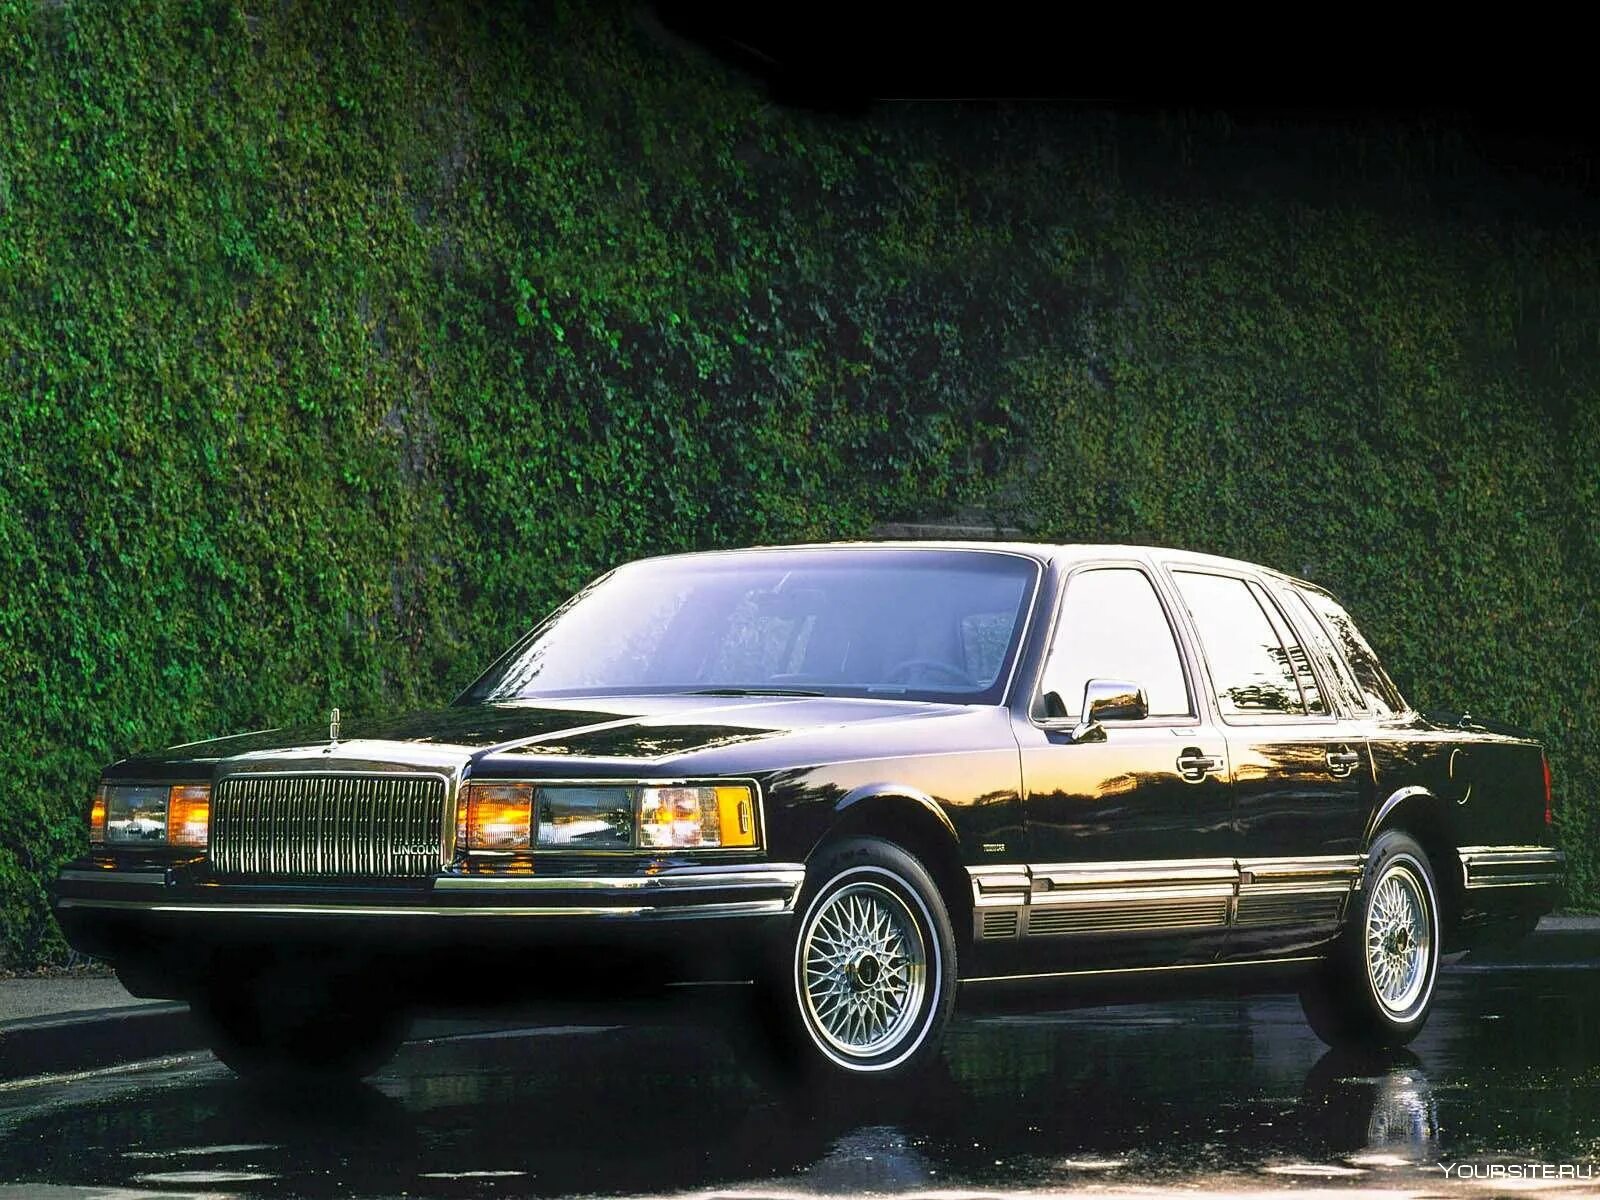 Таун кар 2. Lincoln Town car 1994. Lincoln Town car 1992. Lincoln Town car 1992 года. Lincoln Town 2 car 1994.